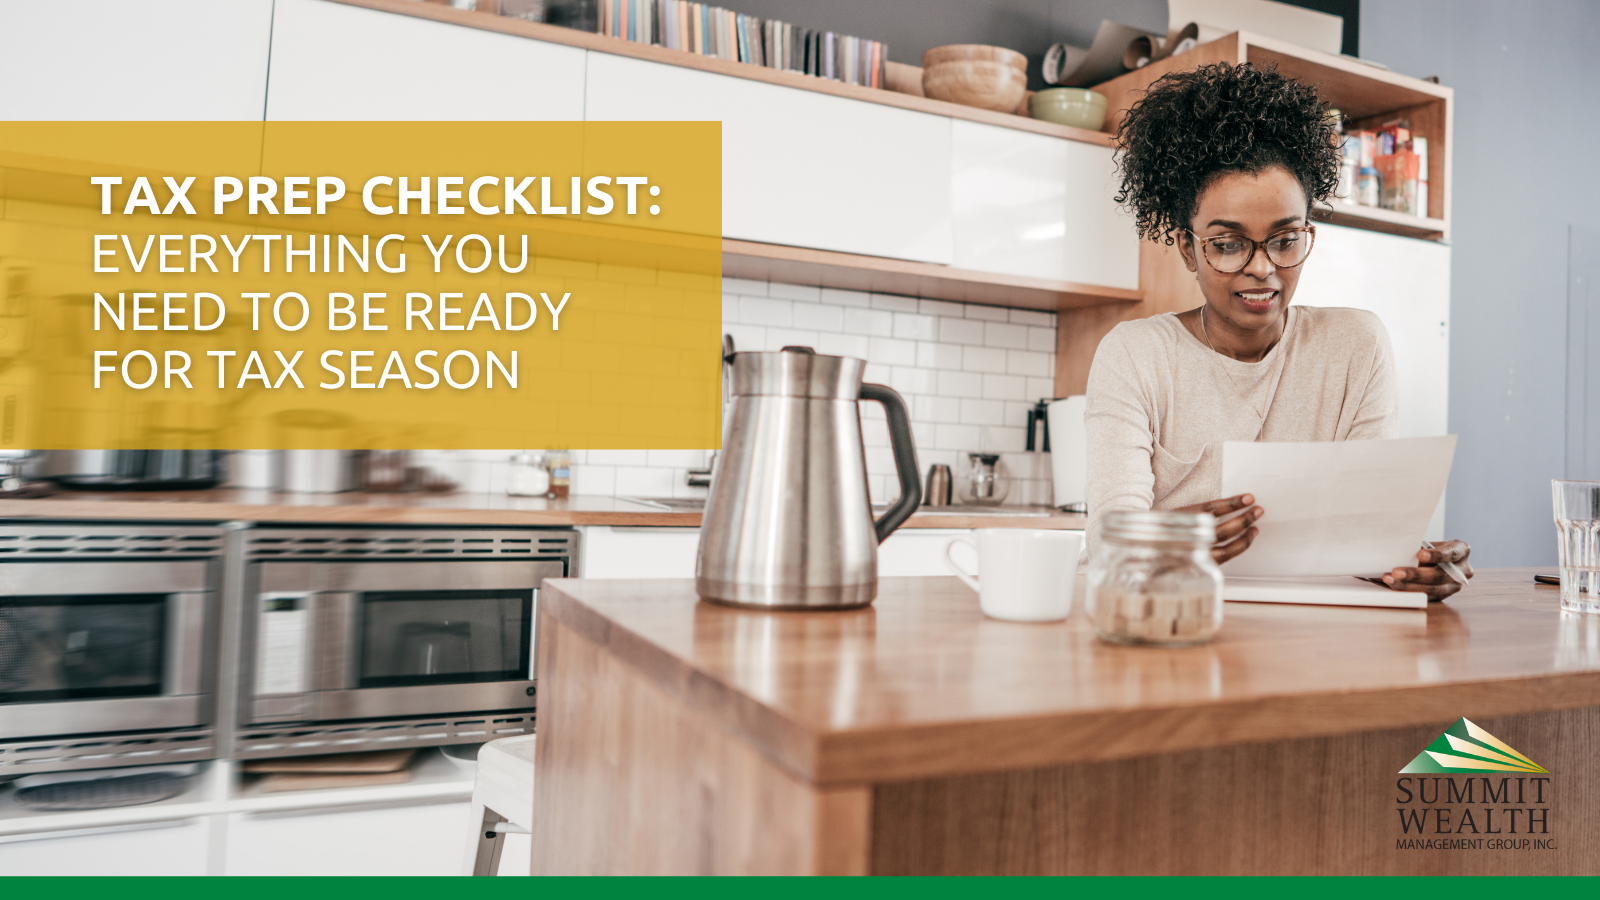 Tax Prep Checklist: Everything You Need to Be Ready for Tax Season